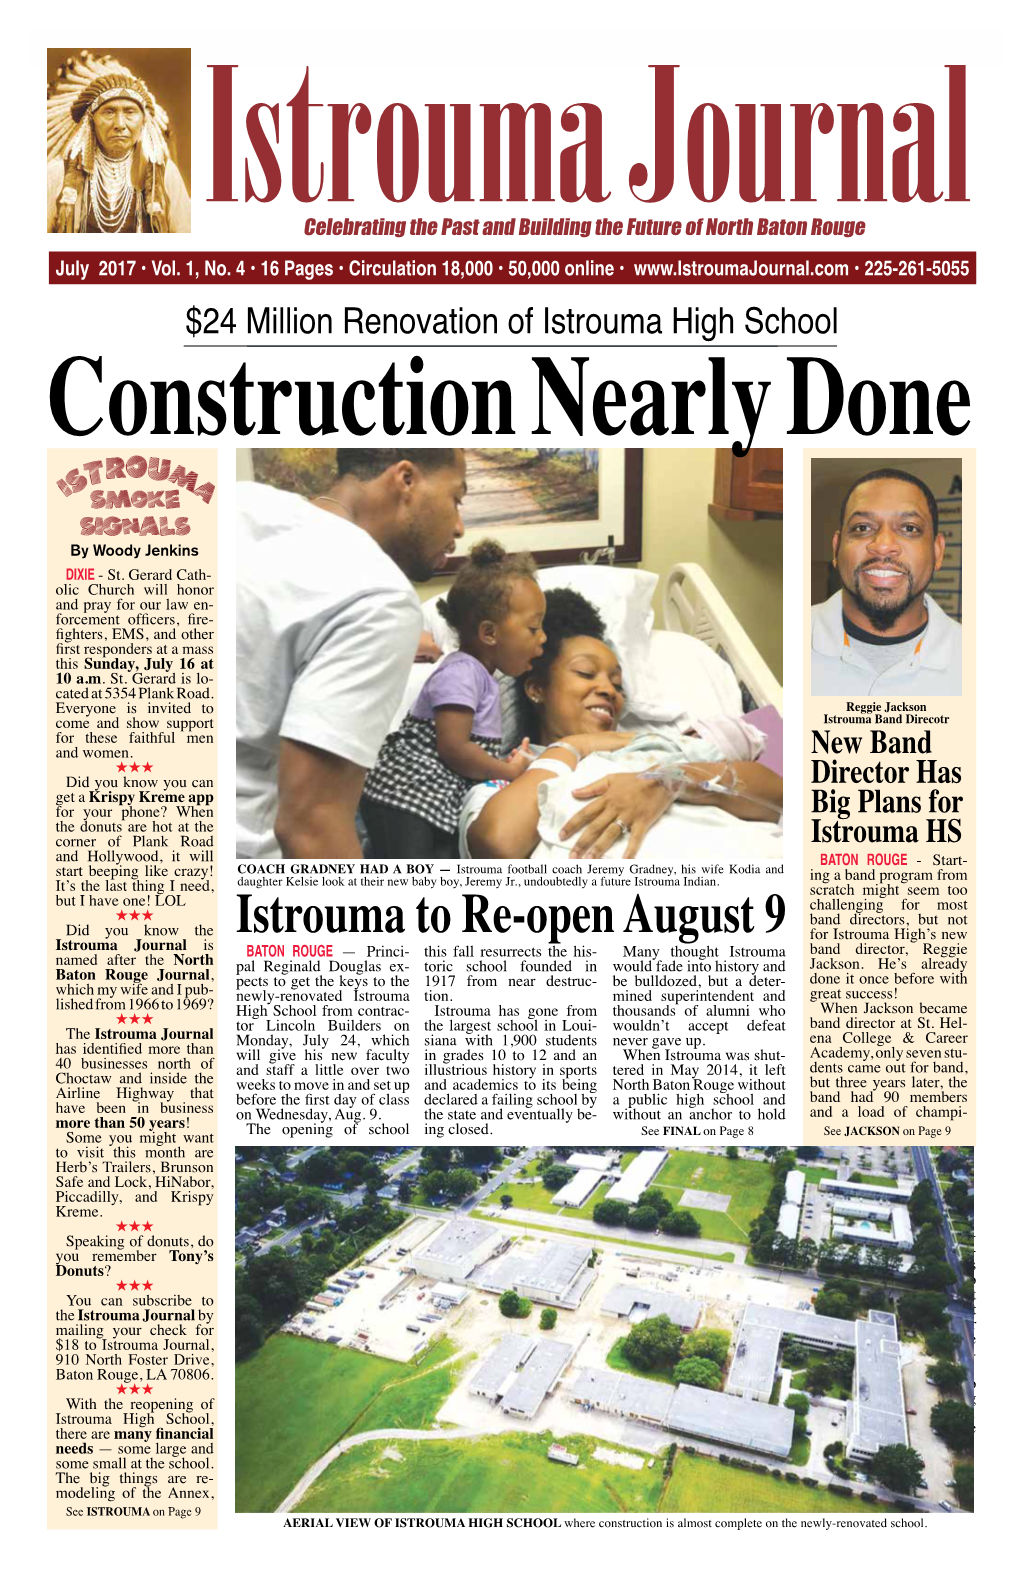 Istrouma to Re-Open August 9